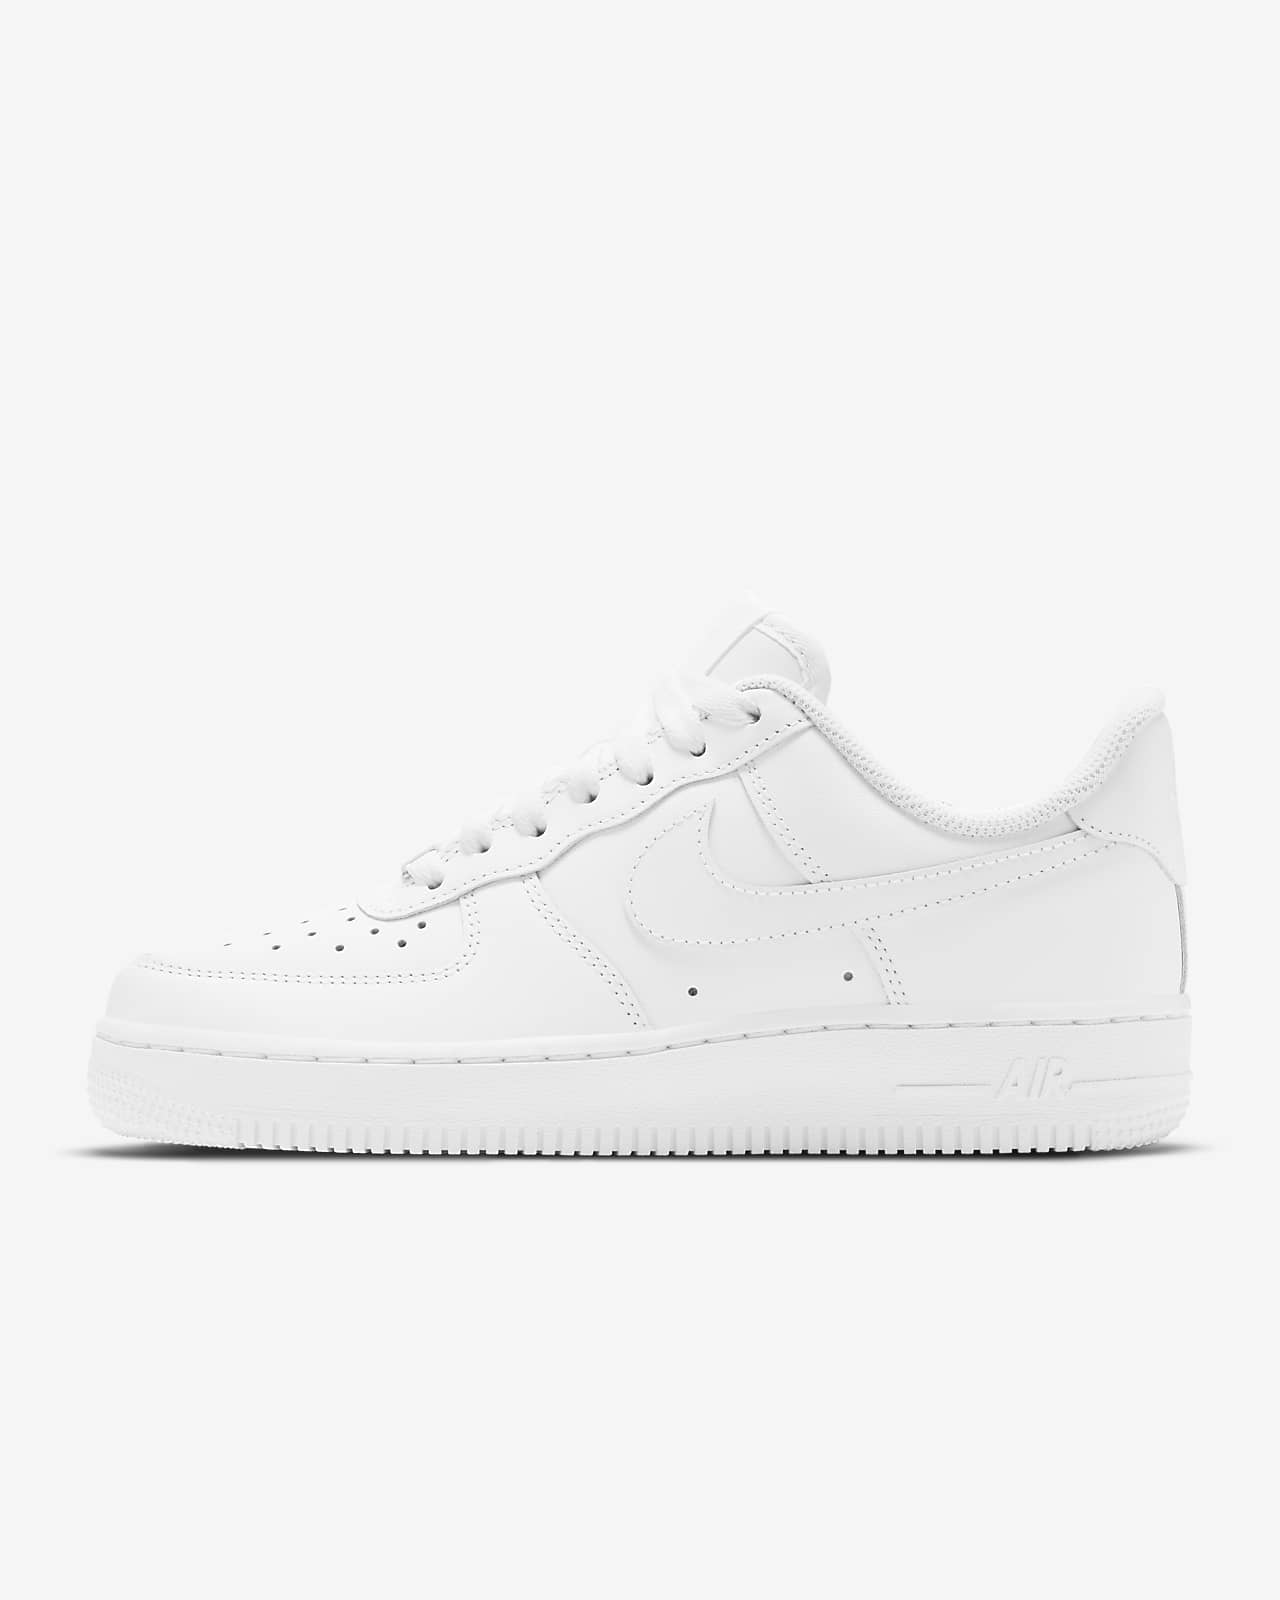 nike air force 1 07 women's white size 8